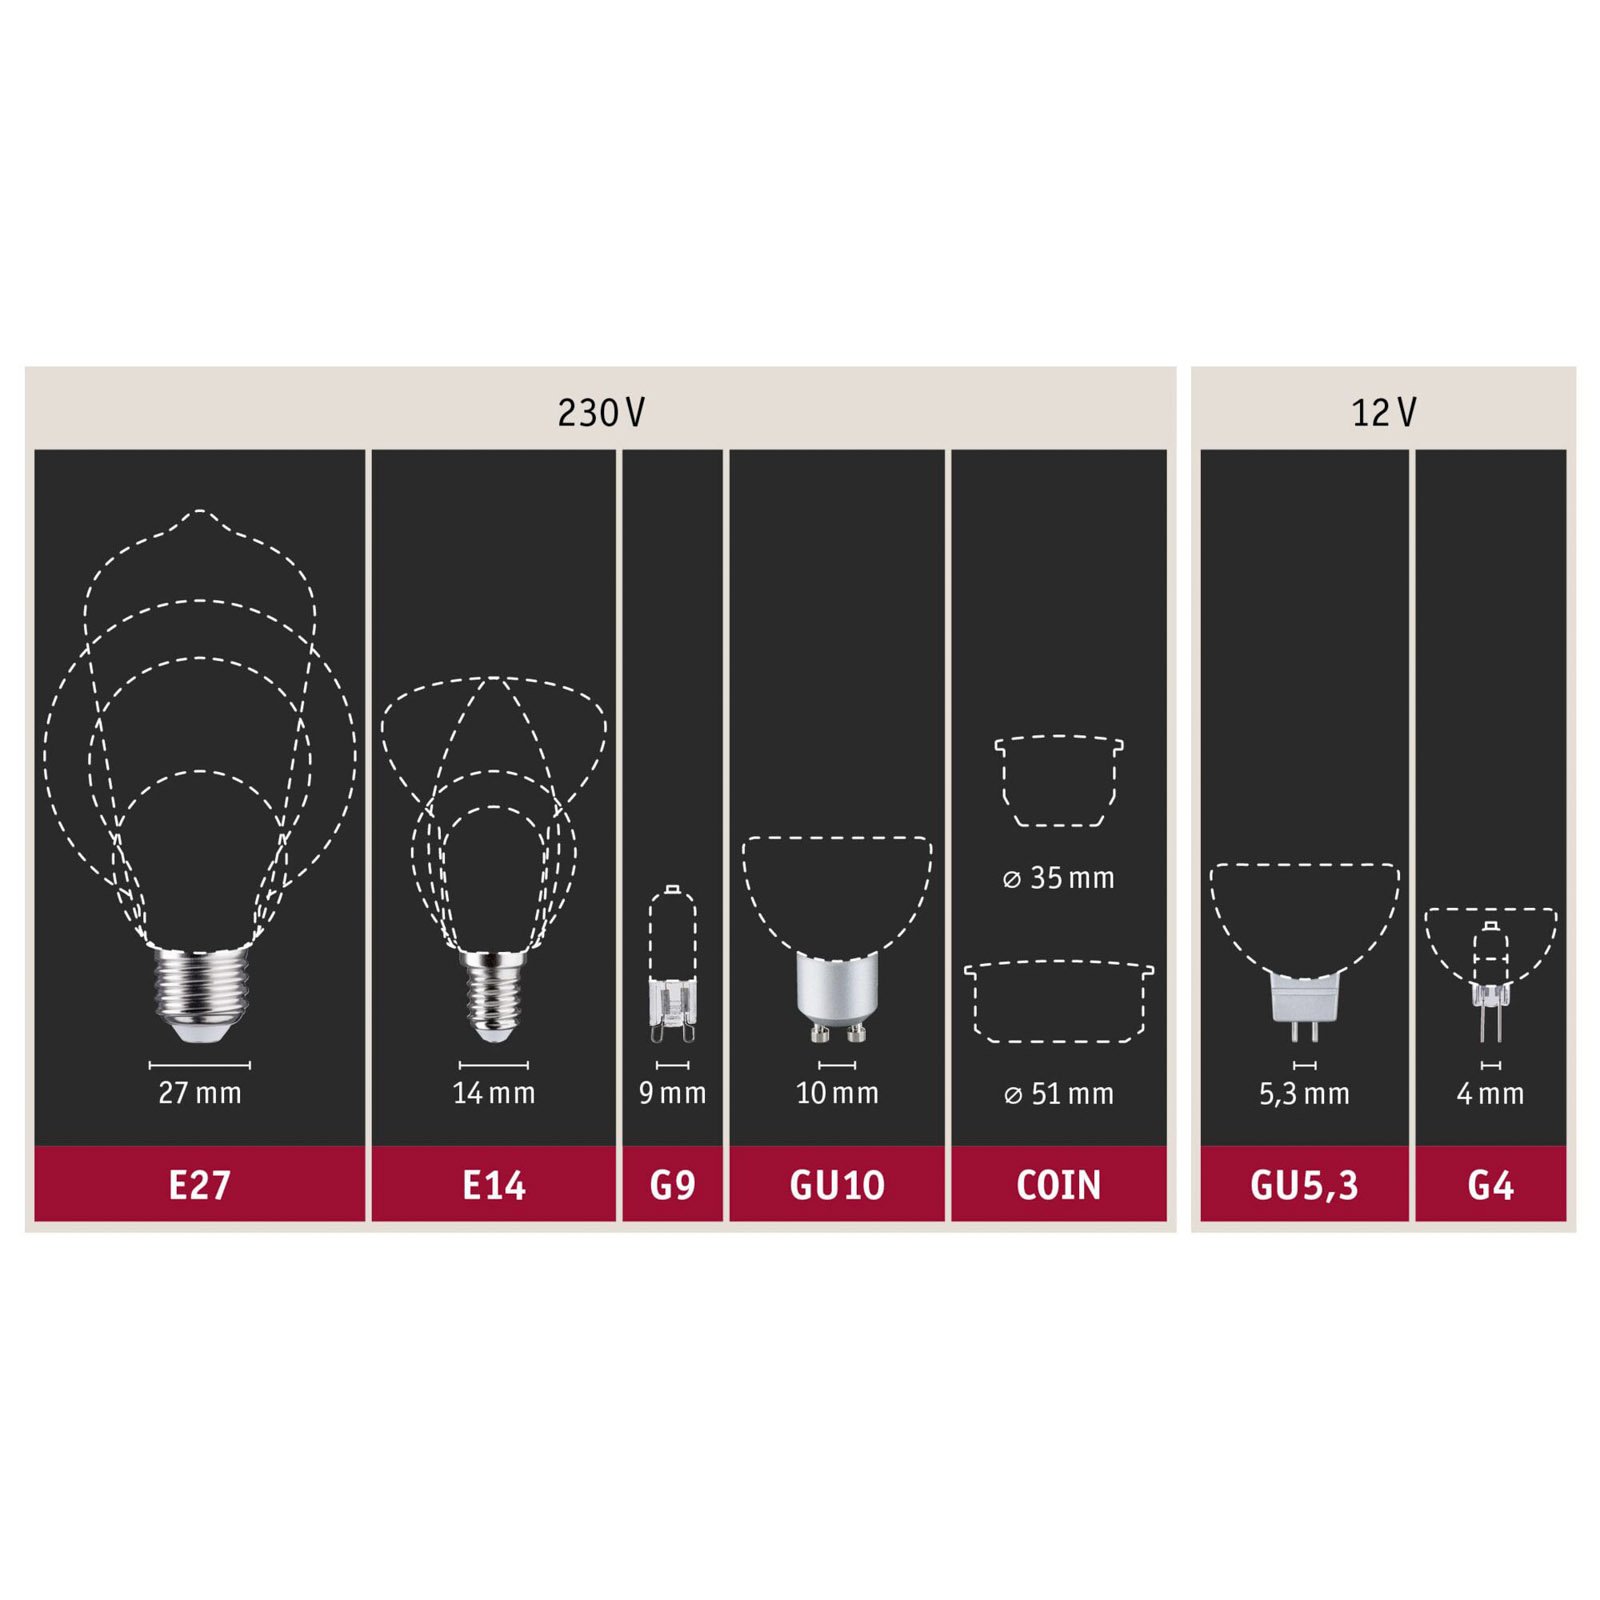 E27 LED bulb 5W filament 2,700K clear dimmable